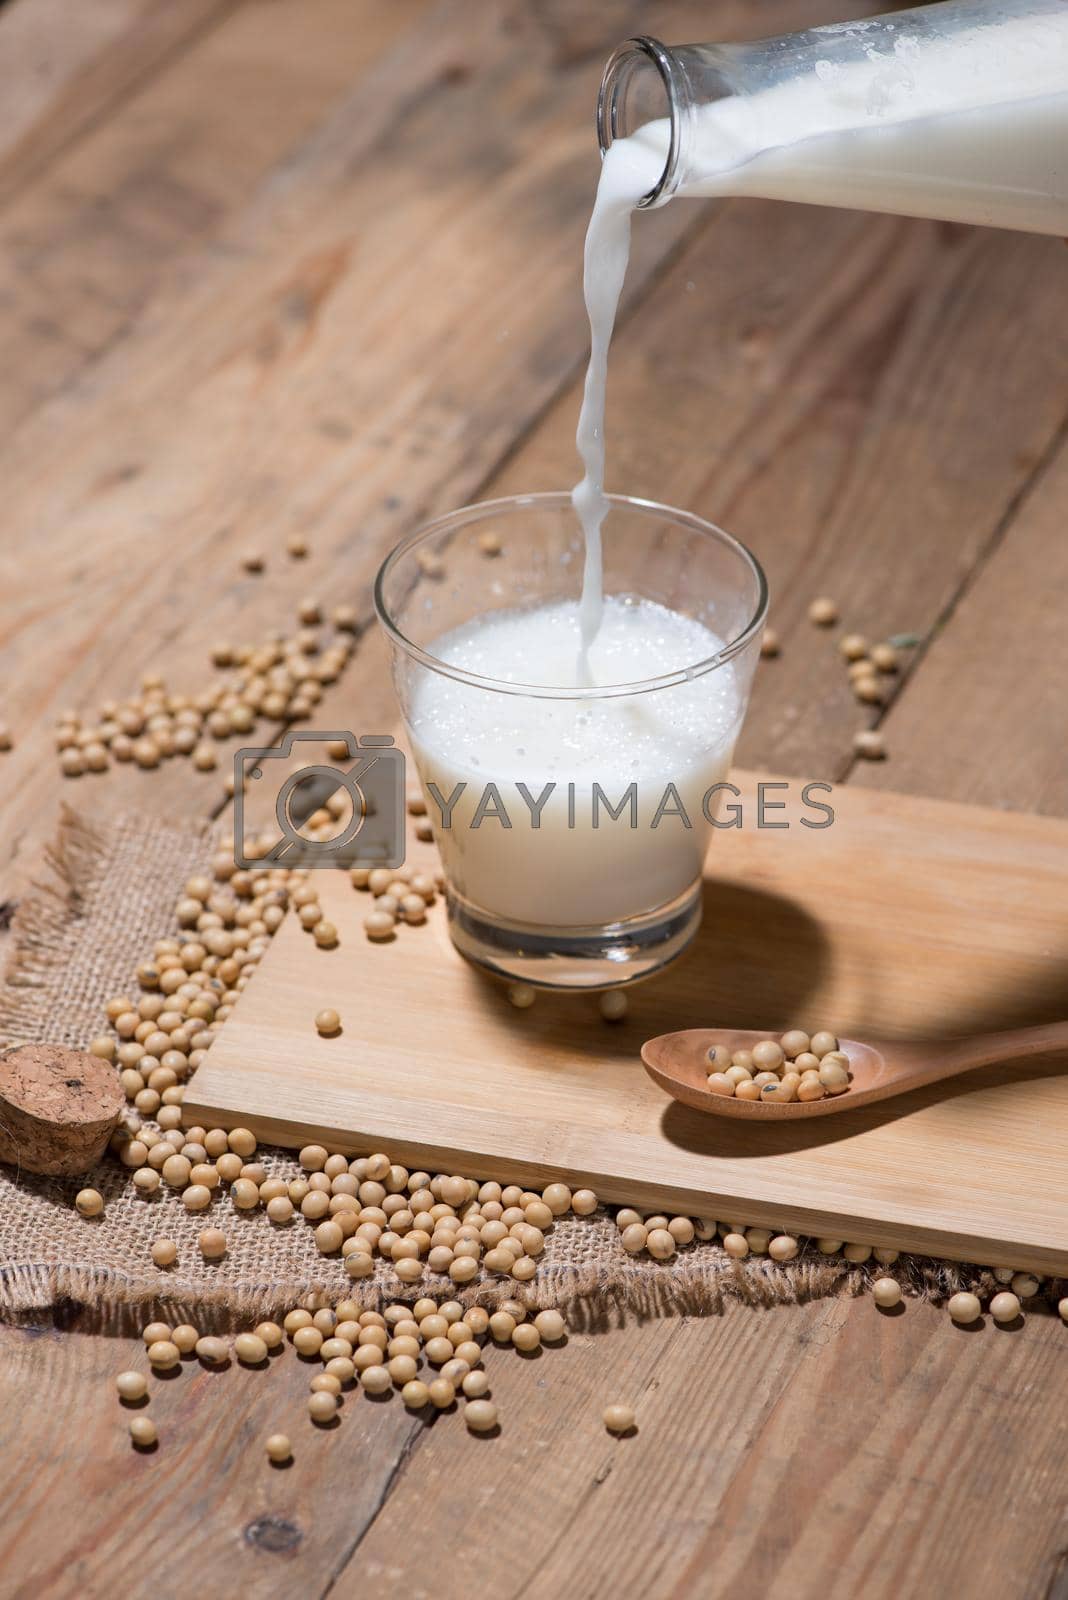 Royalty free image of Soy milk or soya milk and soy beans in spoon on wooden table.  by makidotvn